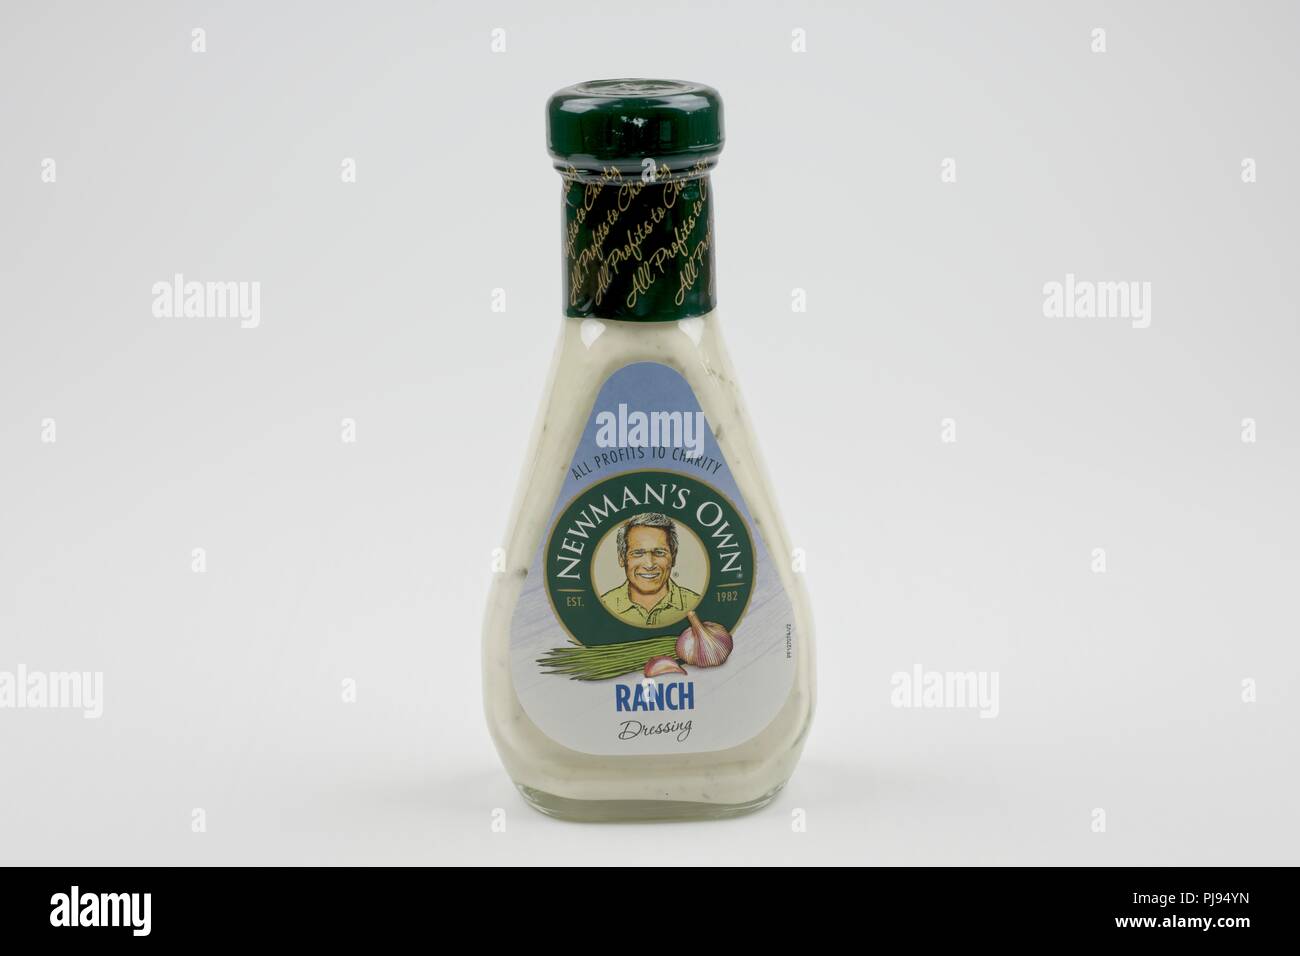 Jar of Newmans own ranch dressing Stock Photo - Alamy